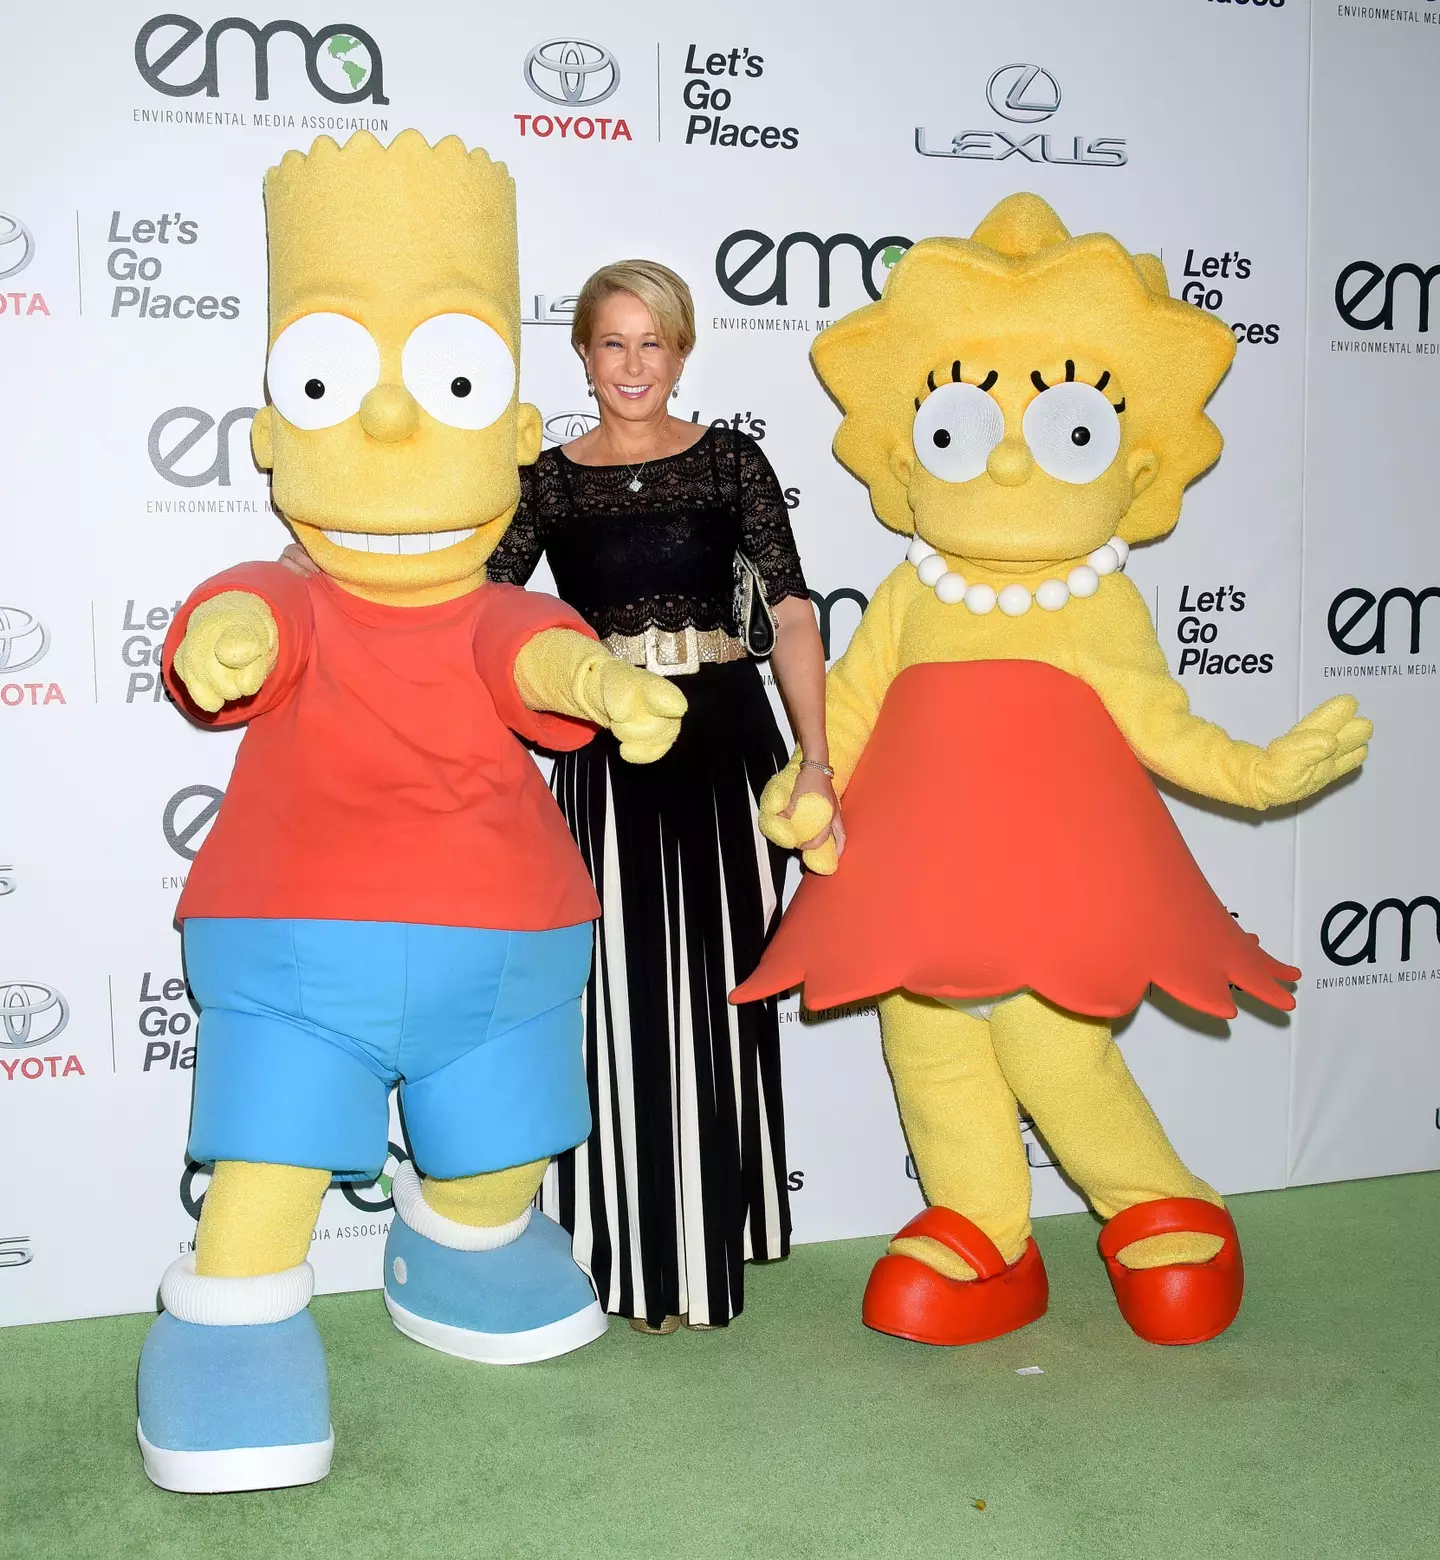 Simpsons star Yeardley Smith met her husband when he became her bodyguard for a day.